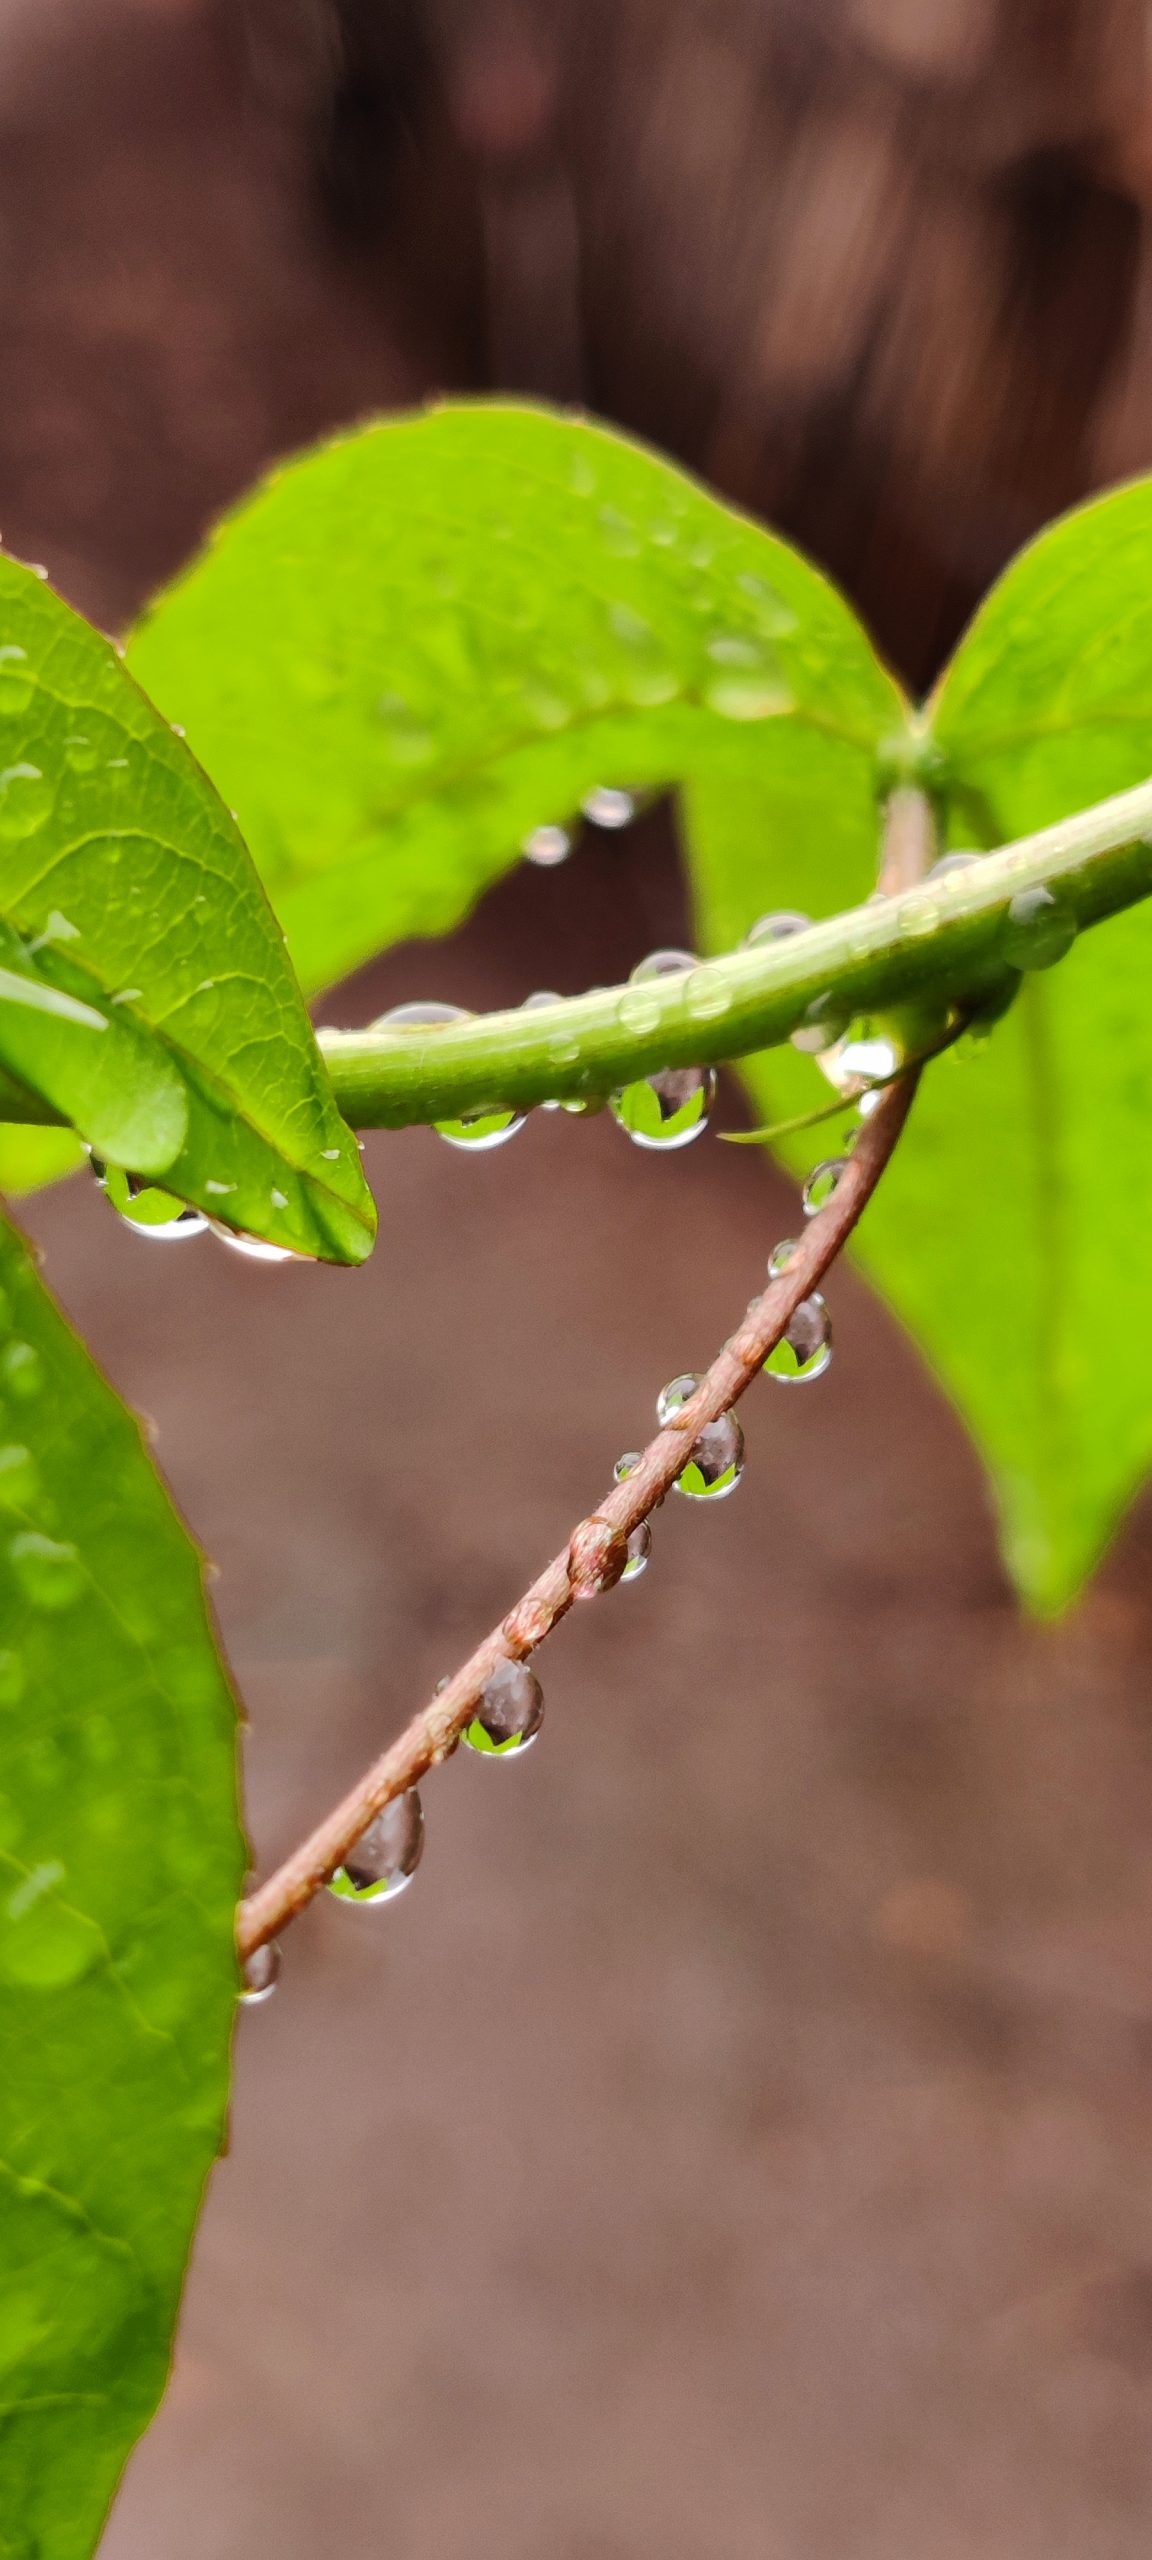 Dew on leaves and stem